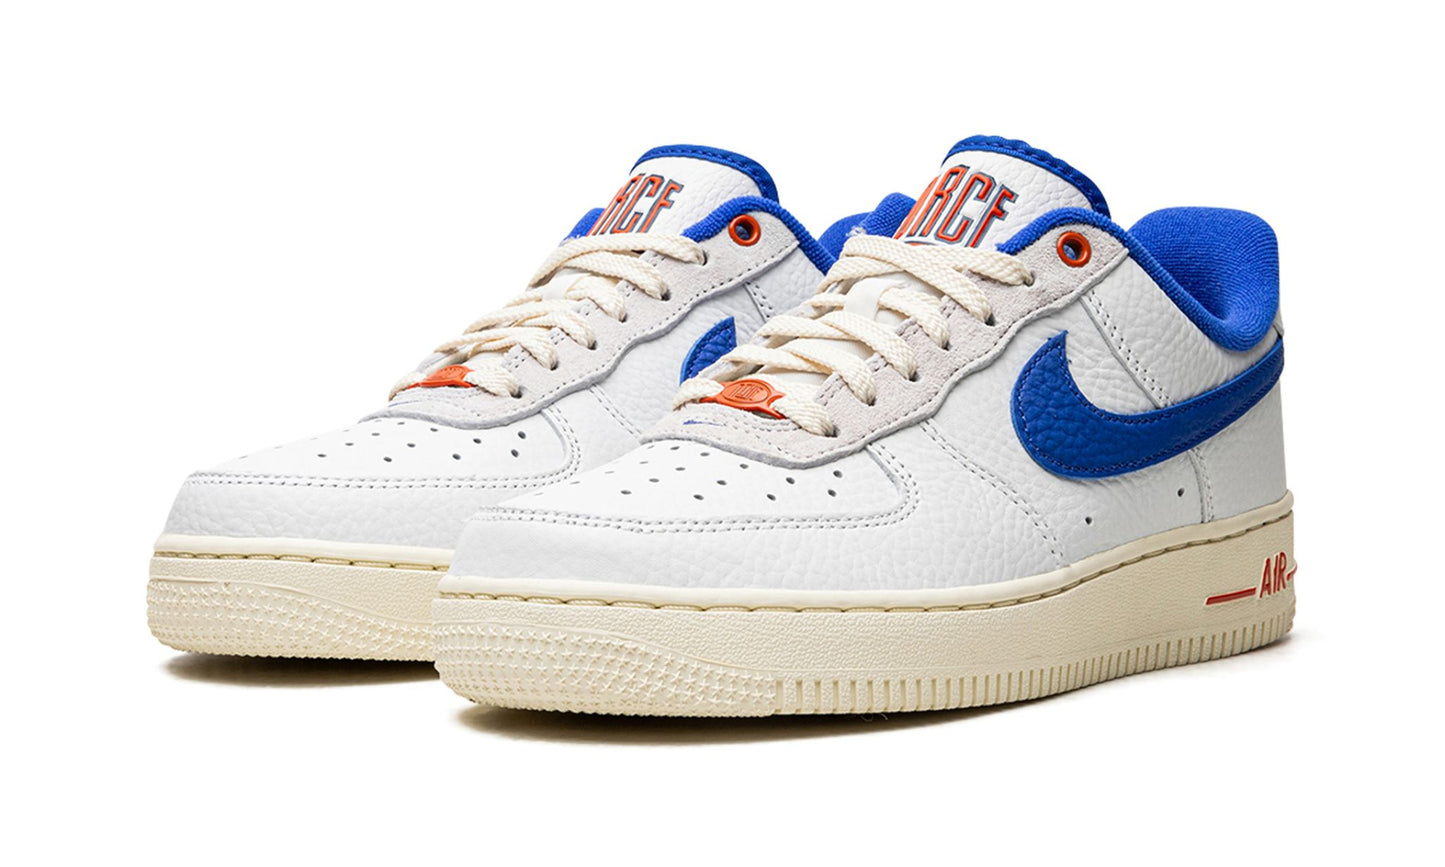 Nike Air Force 1 Low Command Force Blue